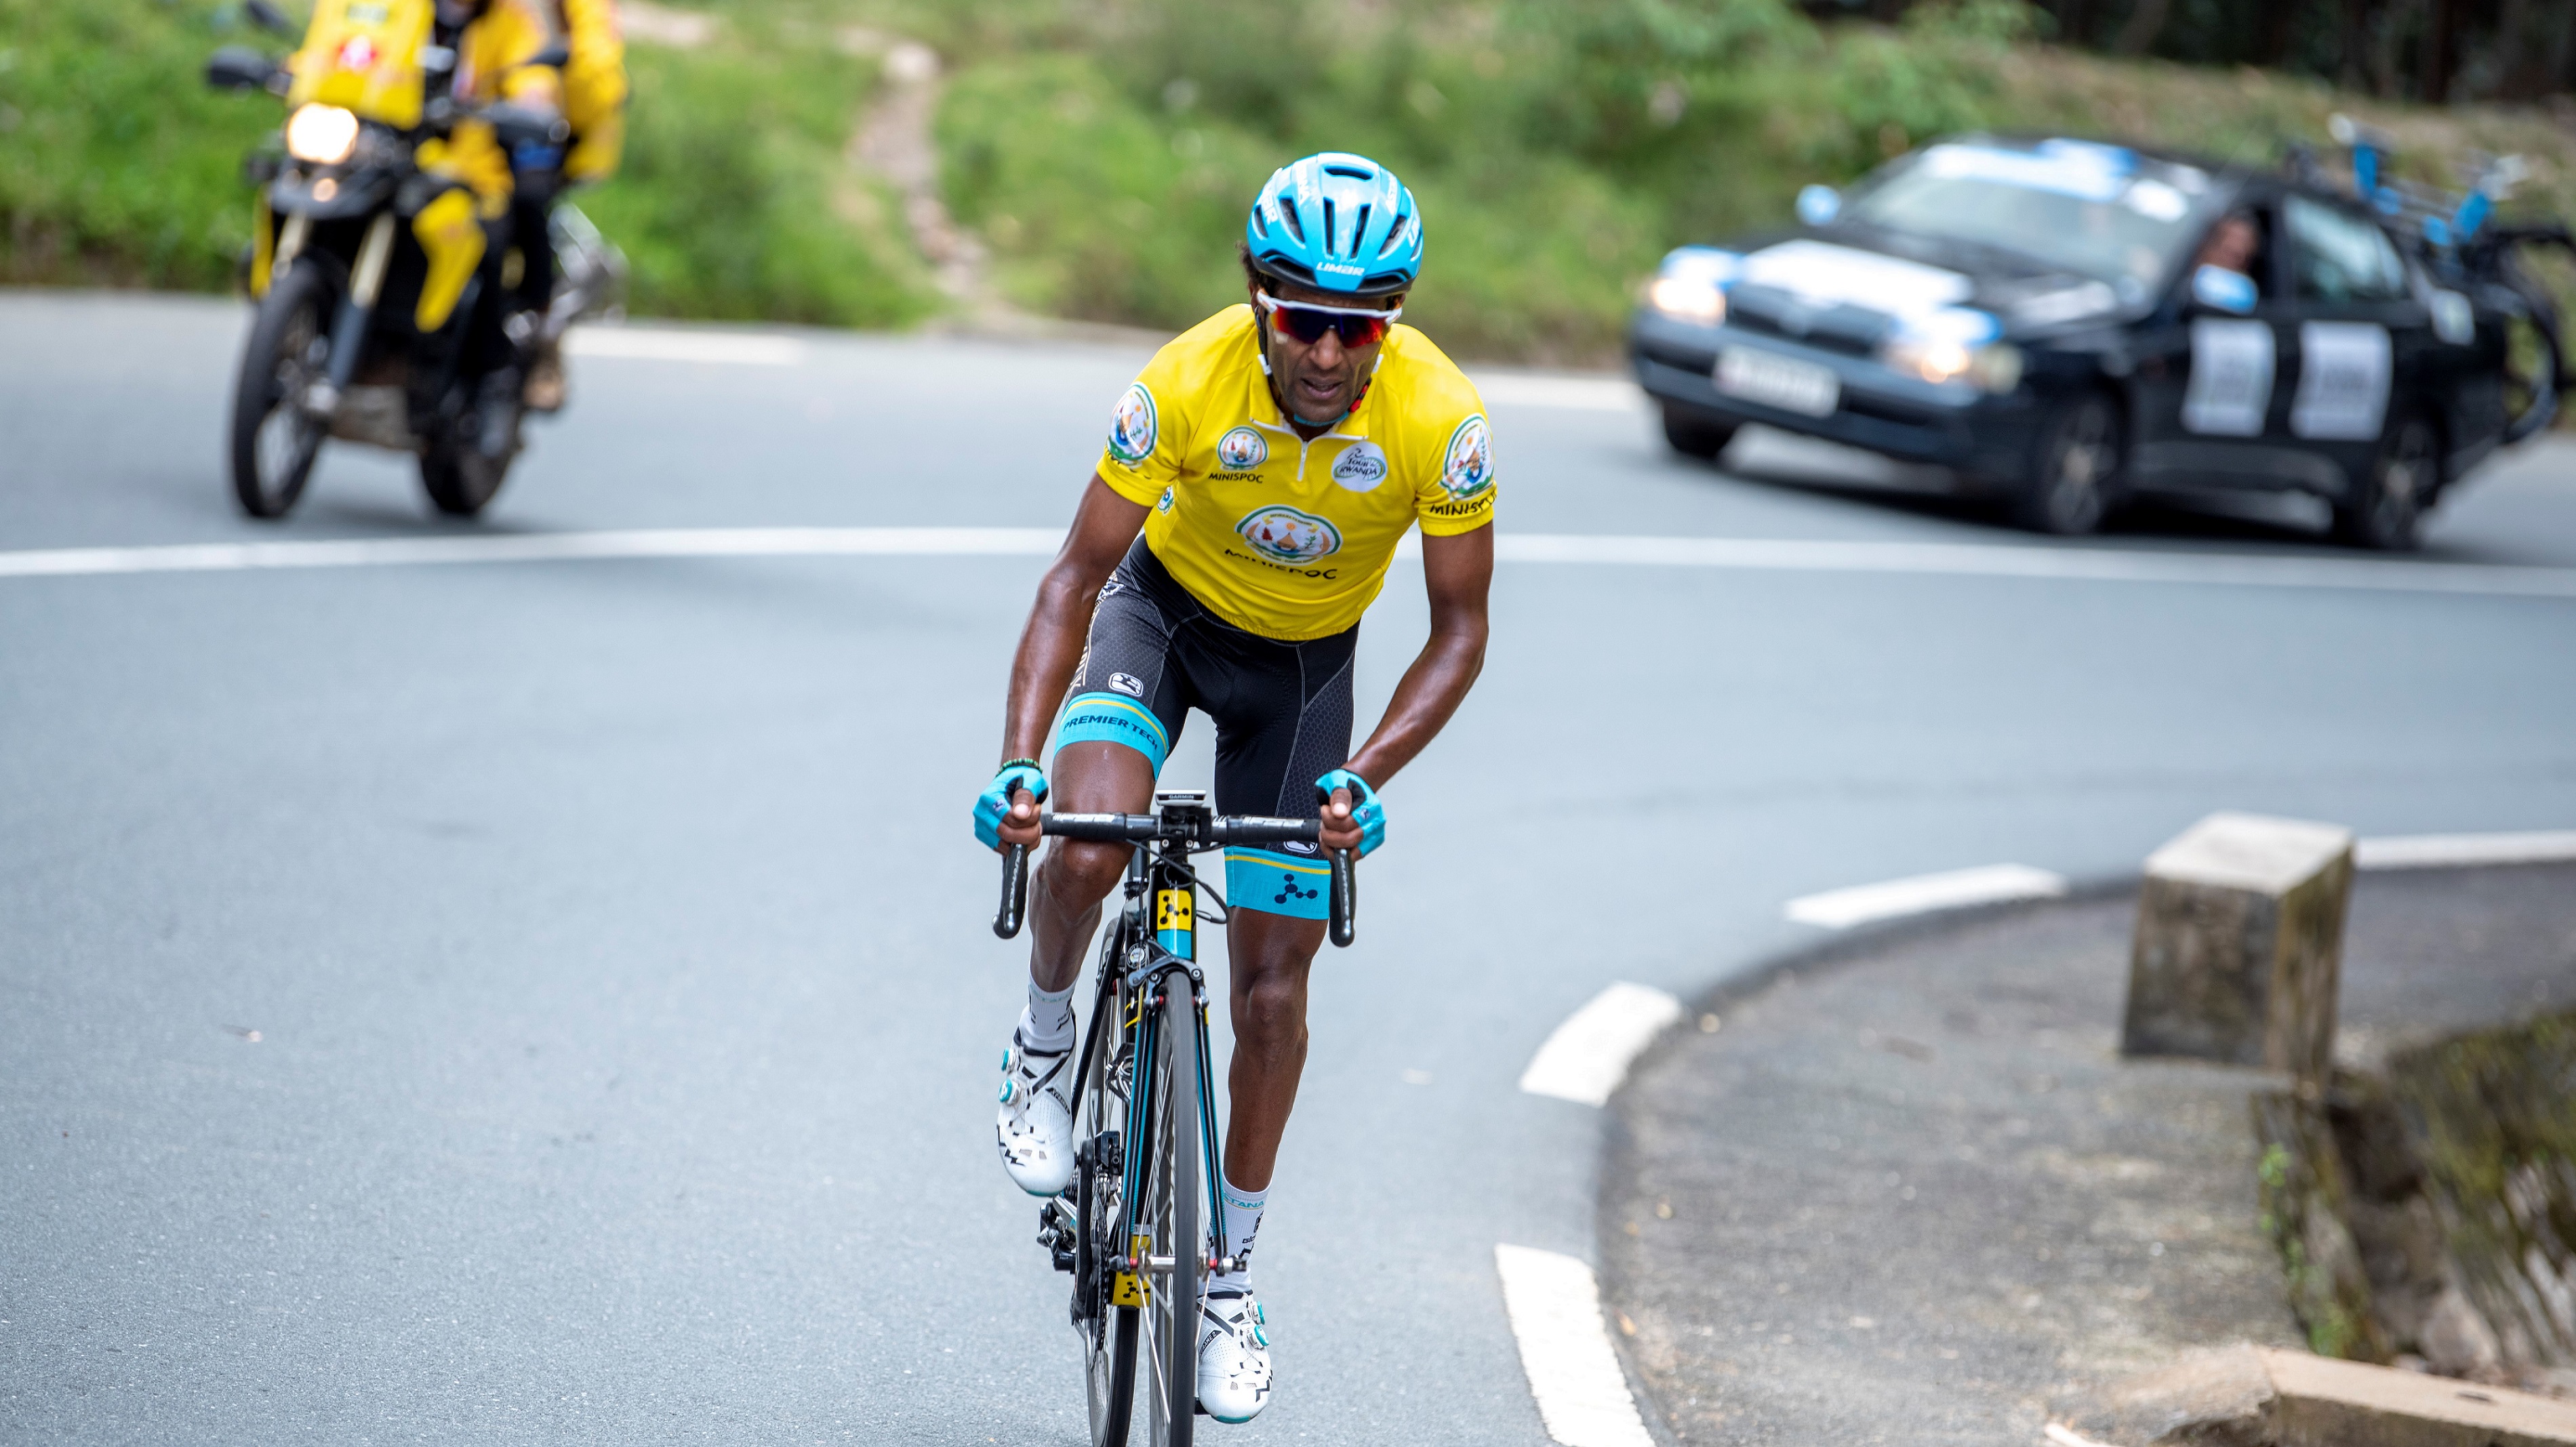 Merhawi Kudus, seen here launching a solo attack during Stage 3 on Tuesday, is one of the only two black Africans to ever race Tour de France u2013 along with compatriot Daniel Teklehaimanot who won the 2010 Tour du Rwanda. Plaisir Muzogeye